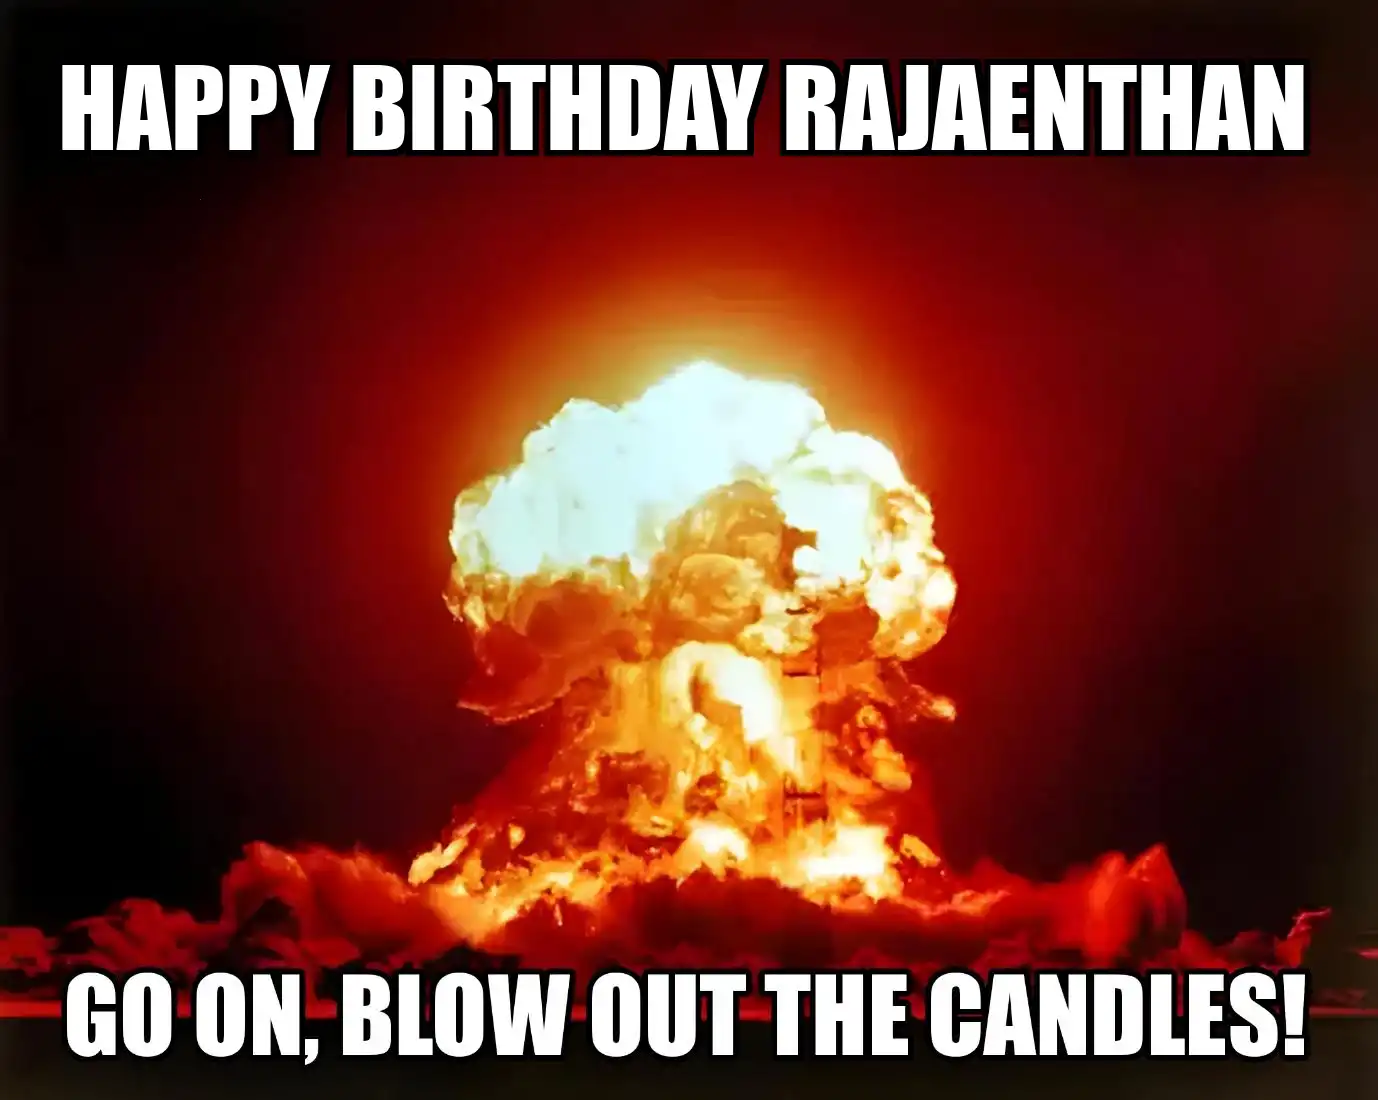 Happy Birthday Rajaenthan Go On Blow Out The Candles Meme